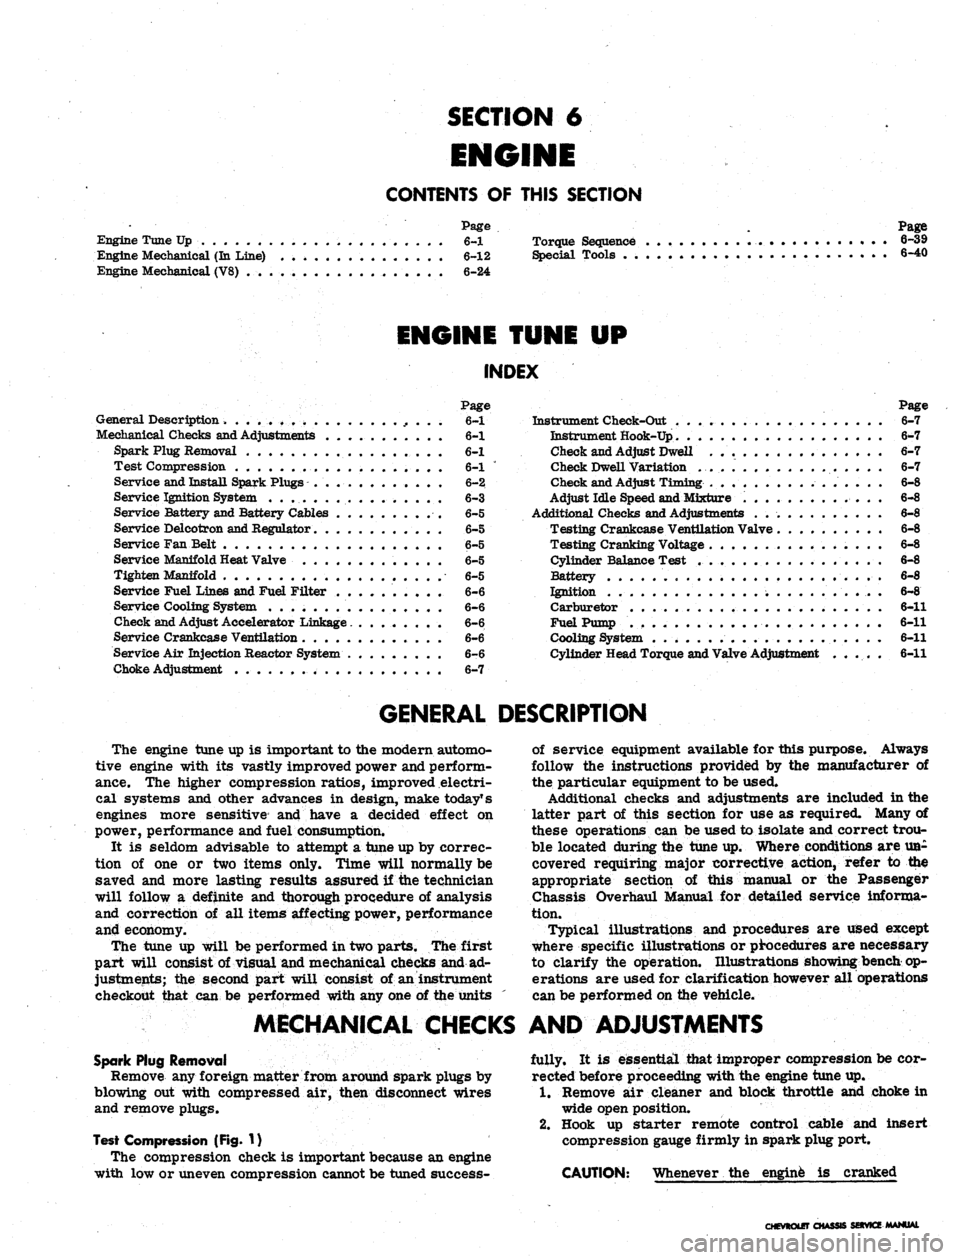 CHEVROLET CAMARO 1967 1.G Chassis Repair Manual 
SECTION 6

ENGINE

CONTENTS
 OF
 THIS SECTION

Page

Engine Tune Up
 6-1
 Torque Sequence

Engine Mechanical
 (In
 Line)
 6-12
 Special Tools
 . .

Engine Mechanical (V8)
 6-24 
Page

6-39

6-40

ENG